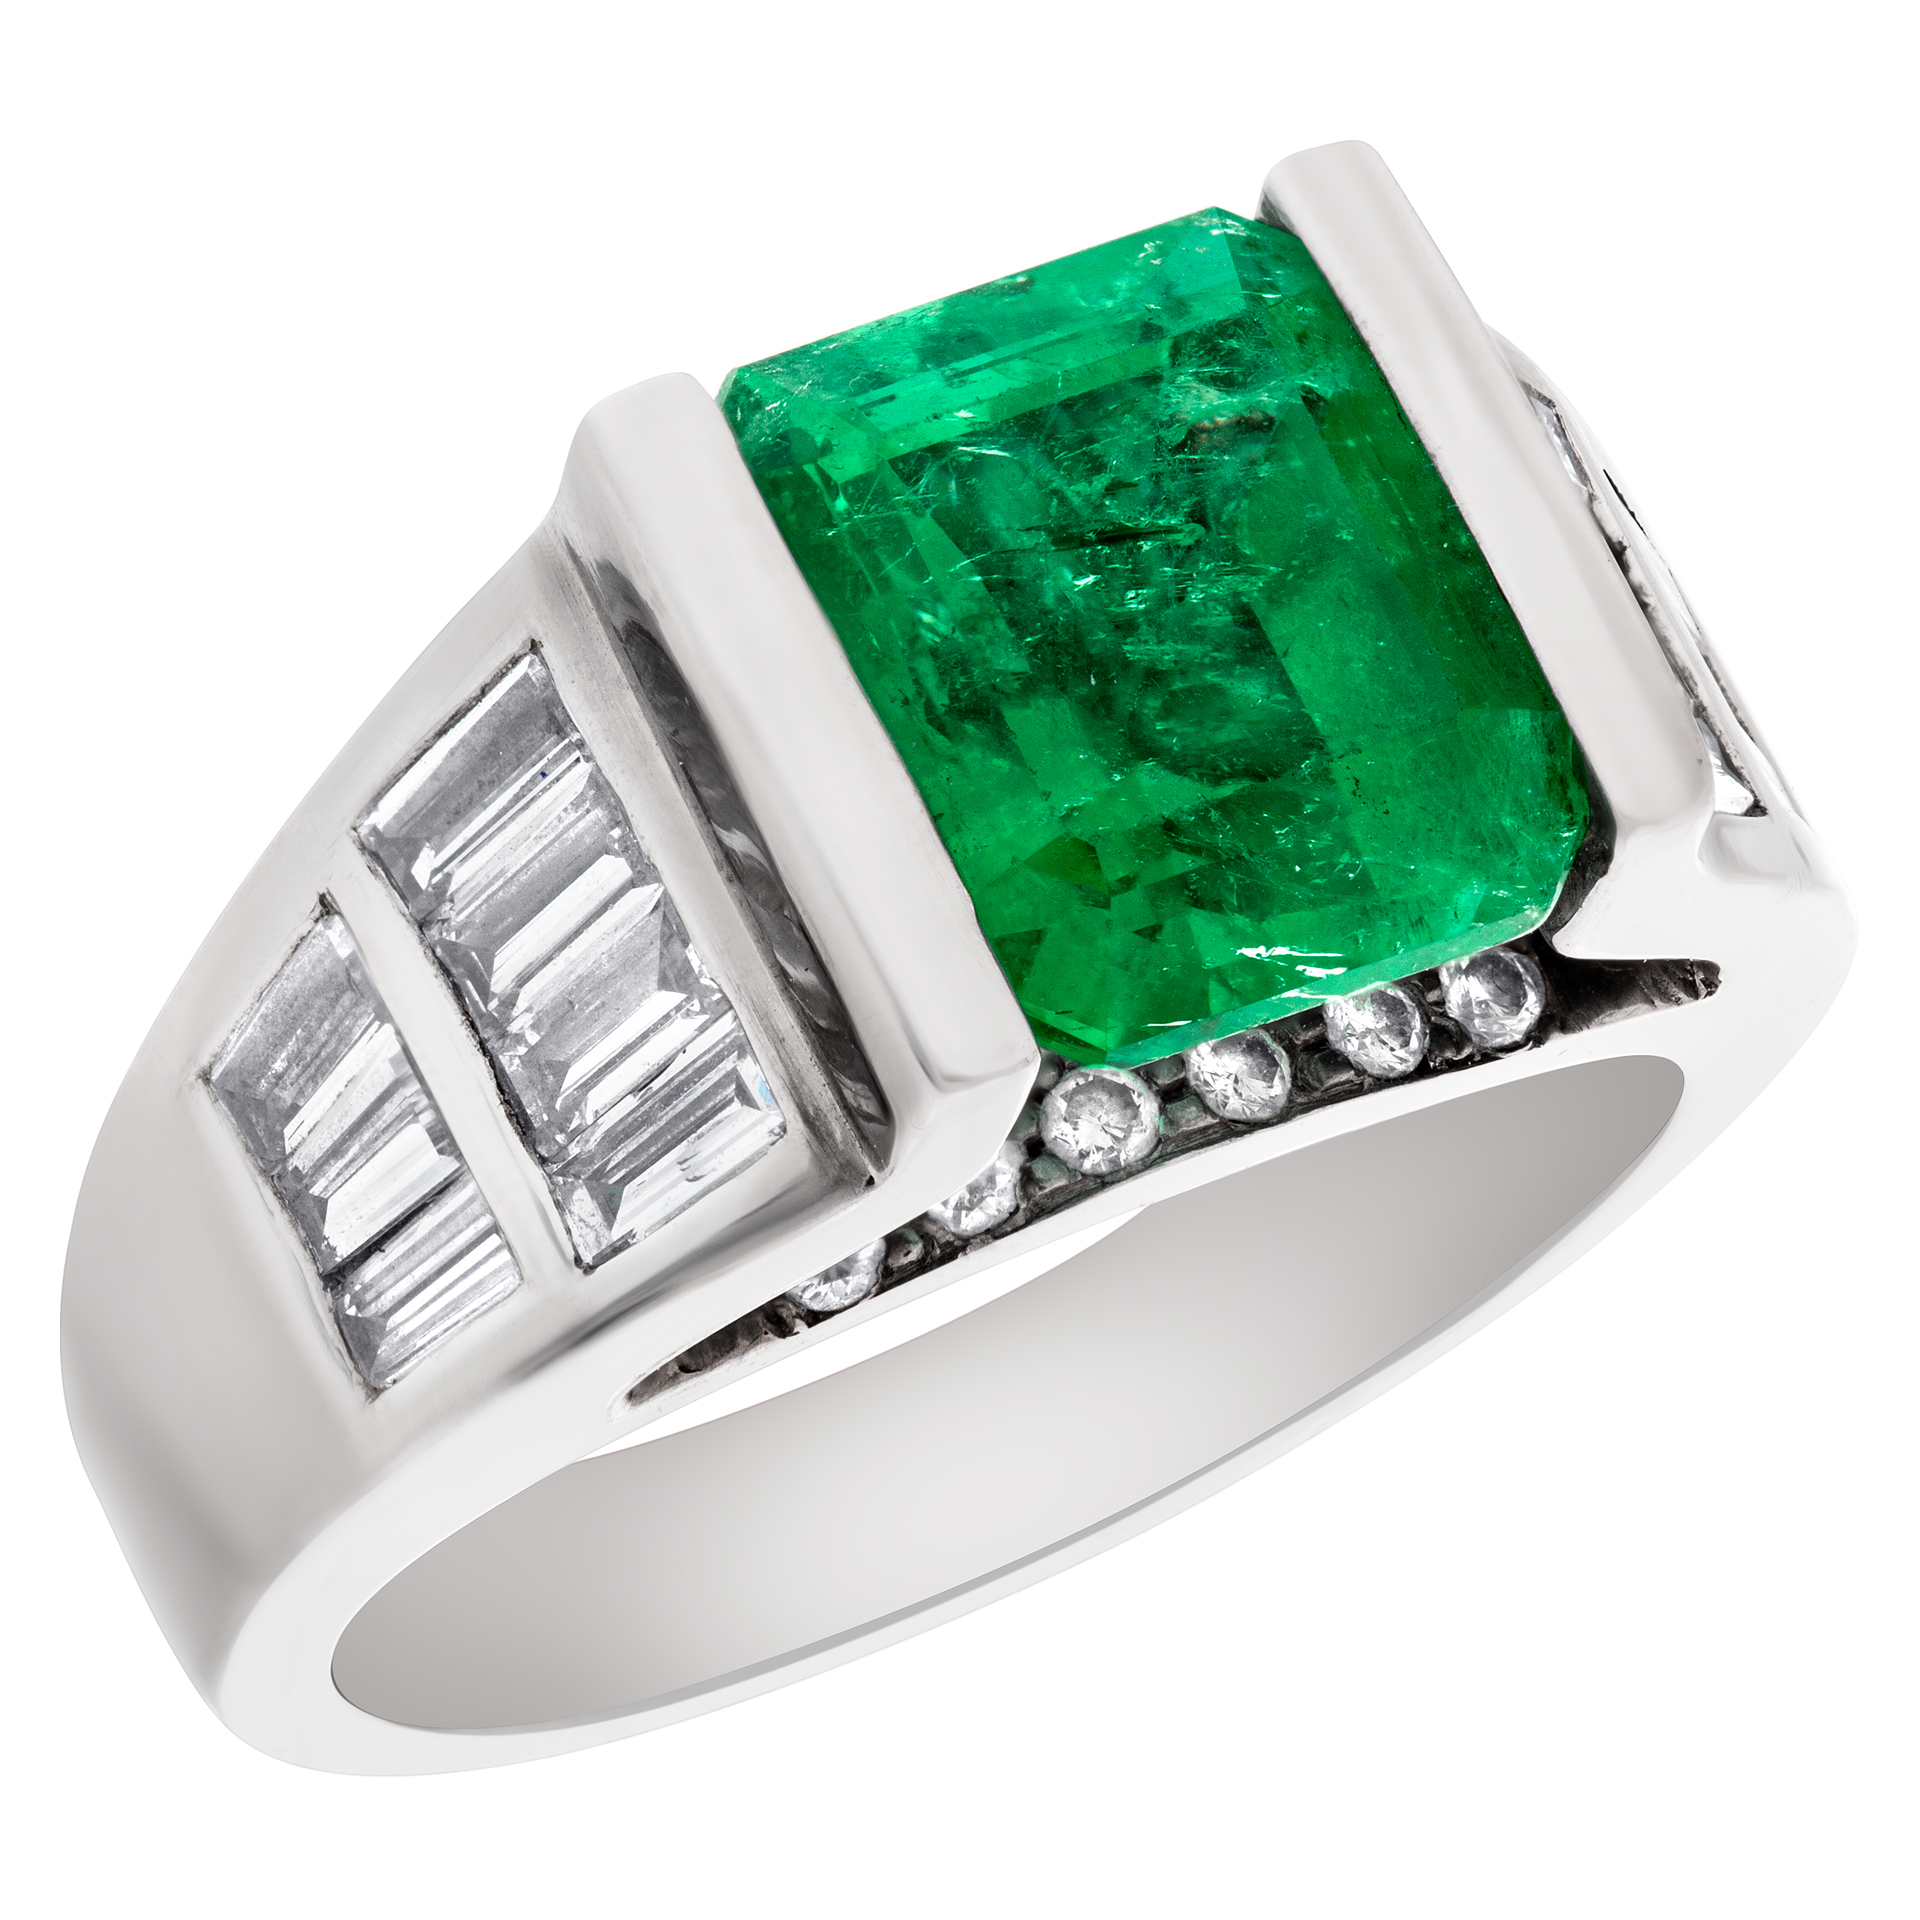 Emerald ring in 14k white gold. 3.16 Carat emerald, 1.05 Cts in diamonds. image 3